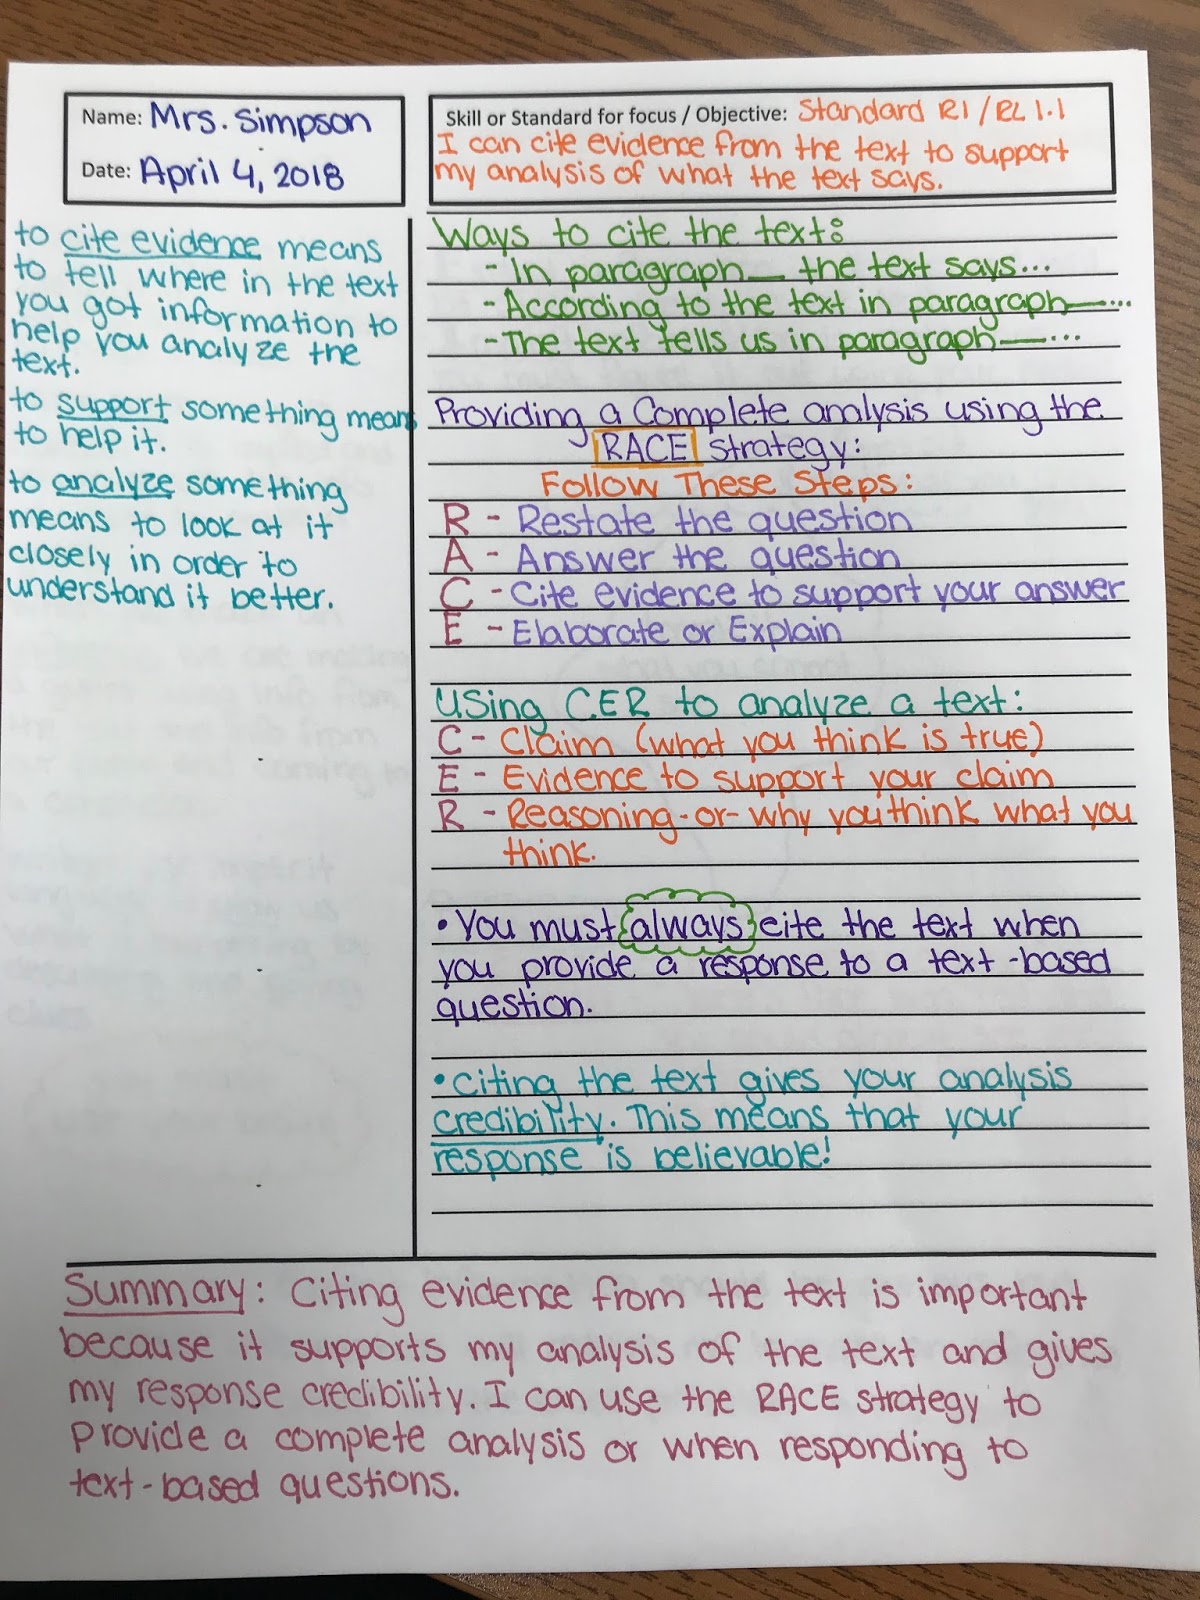 How I use Cornell Notes Effectively in my Laguage Arts Classroom - Teach101